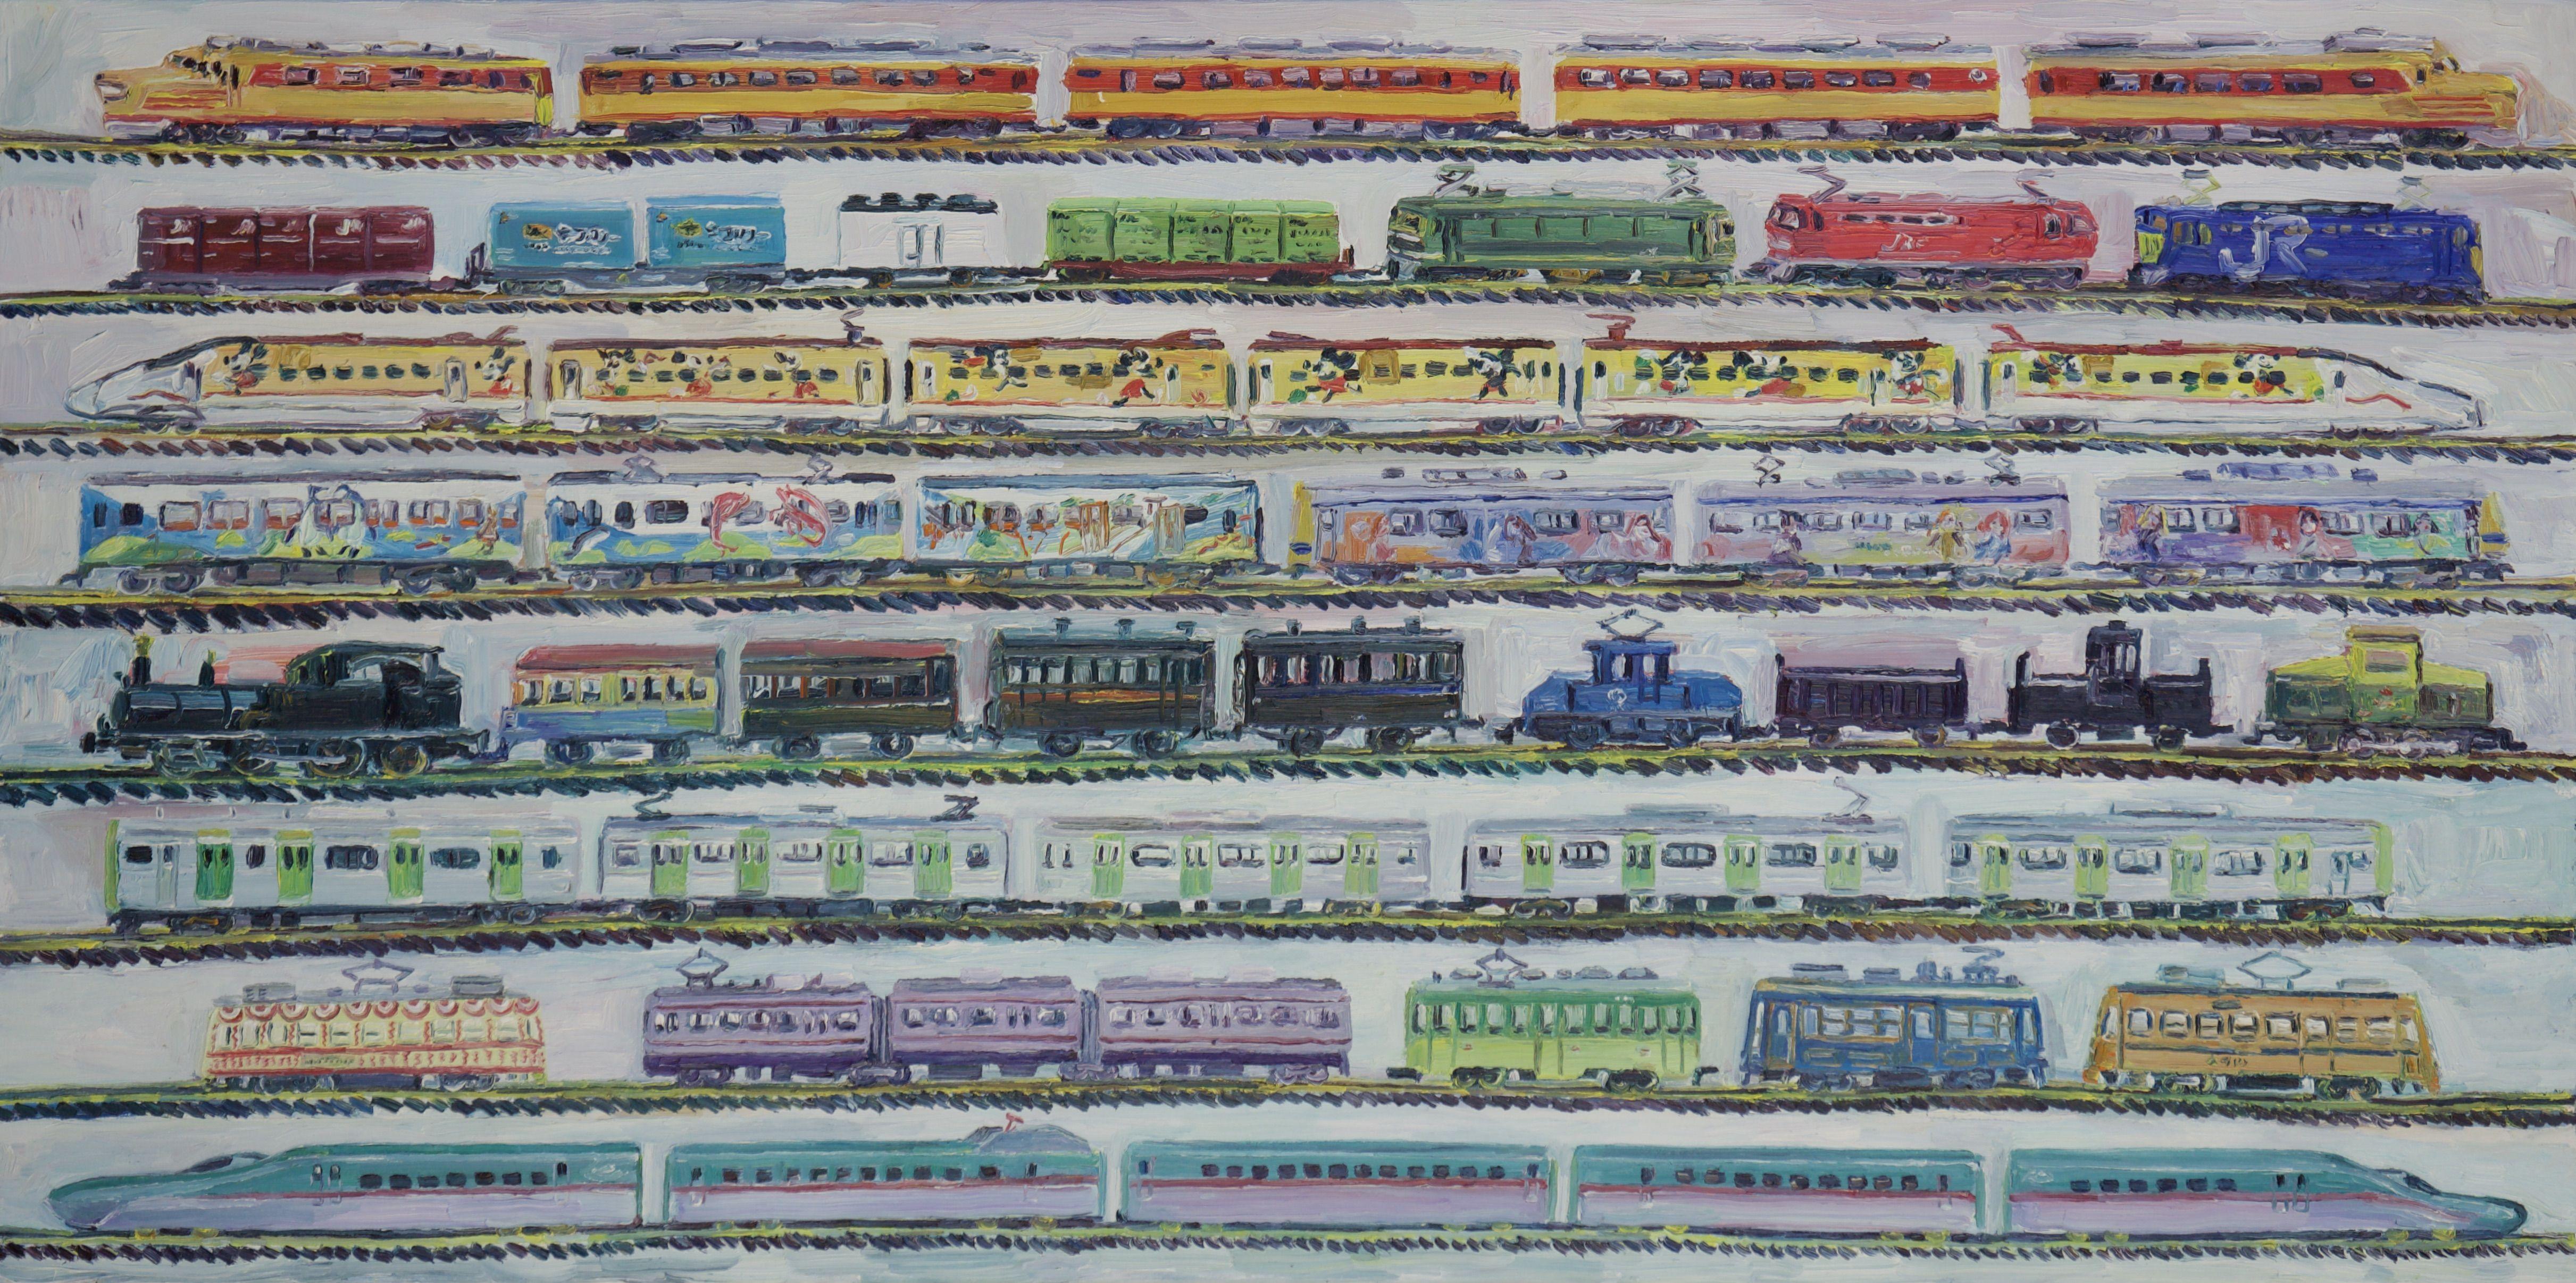 This is my collection of Japanese model railroad trains that I painted from the internet. :: Painting :: Fine Art :: This piece comes with an official certificate of authenticity signed by the artist :: Ready to Hang: No :: Signed: Yes :: Signature